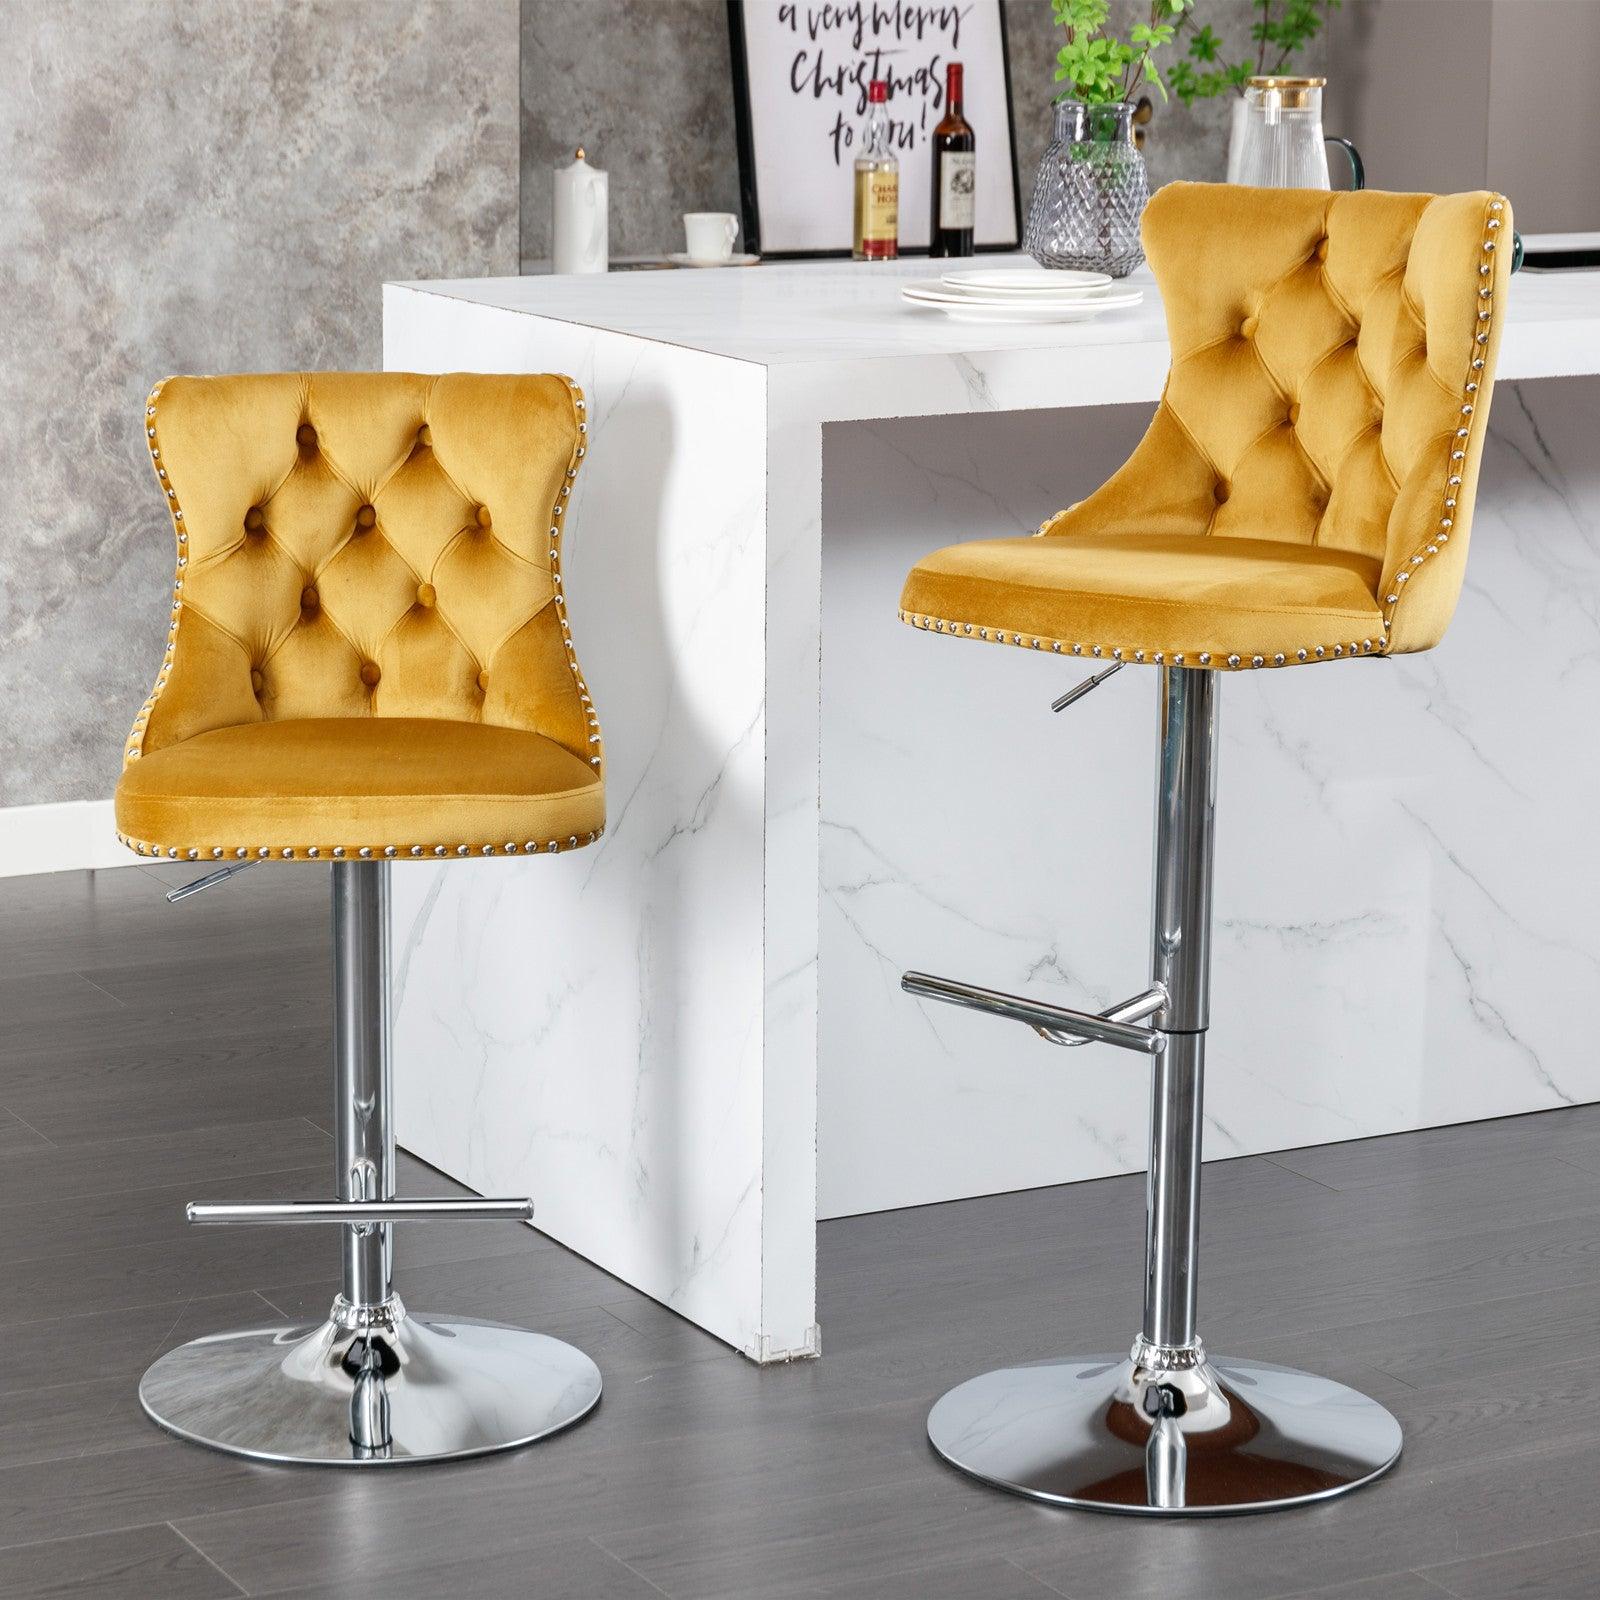 🆓🚛 Swivel Velvet Barstools Adjusatble Seat Height From 25-33 Inch, Modern Upholstered Chrome Base Bar Stools With Backs Comfortable Tufted for Home Pub & Kitchen Island（Gold, Set Of 2）